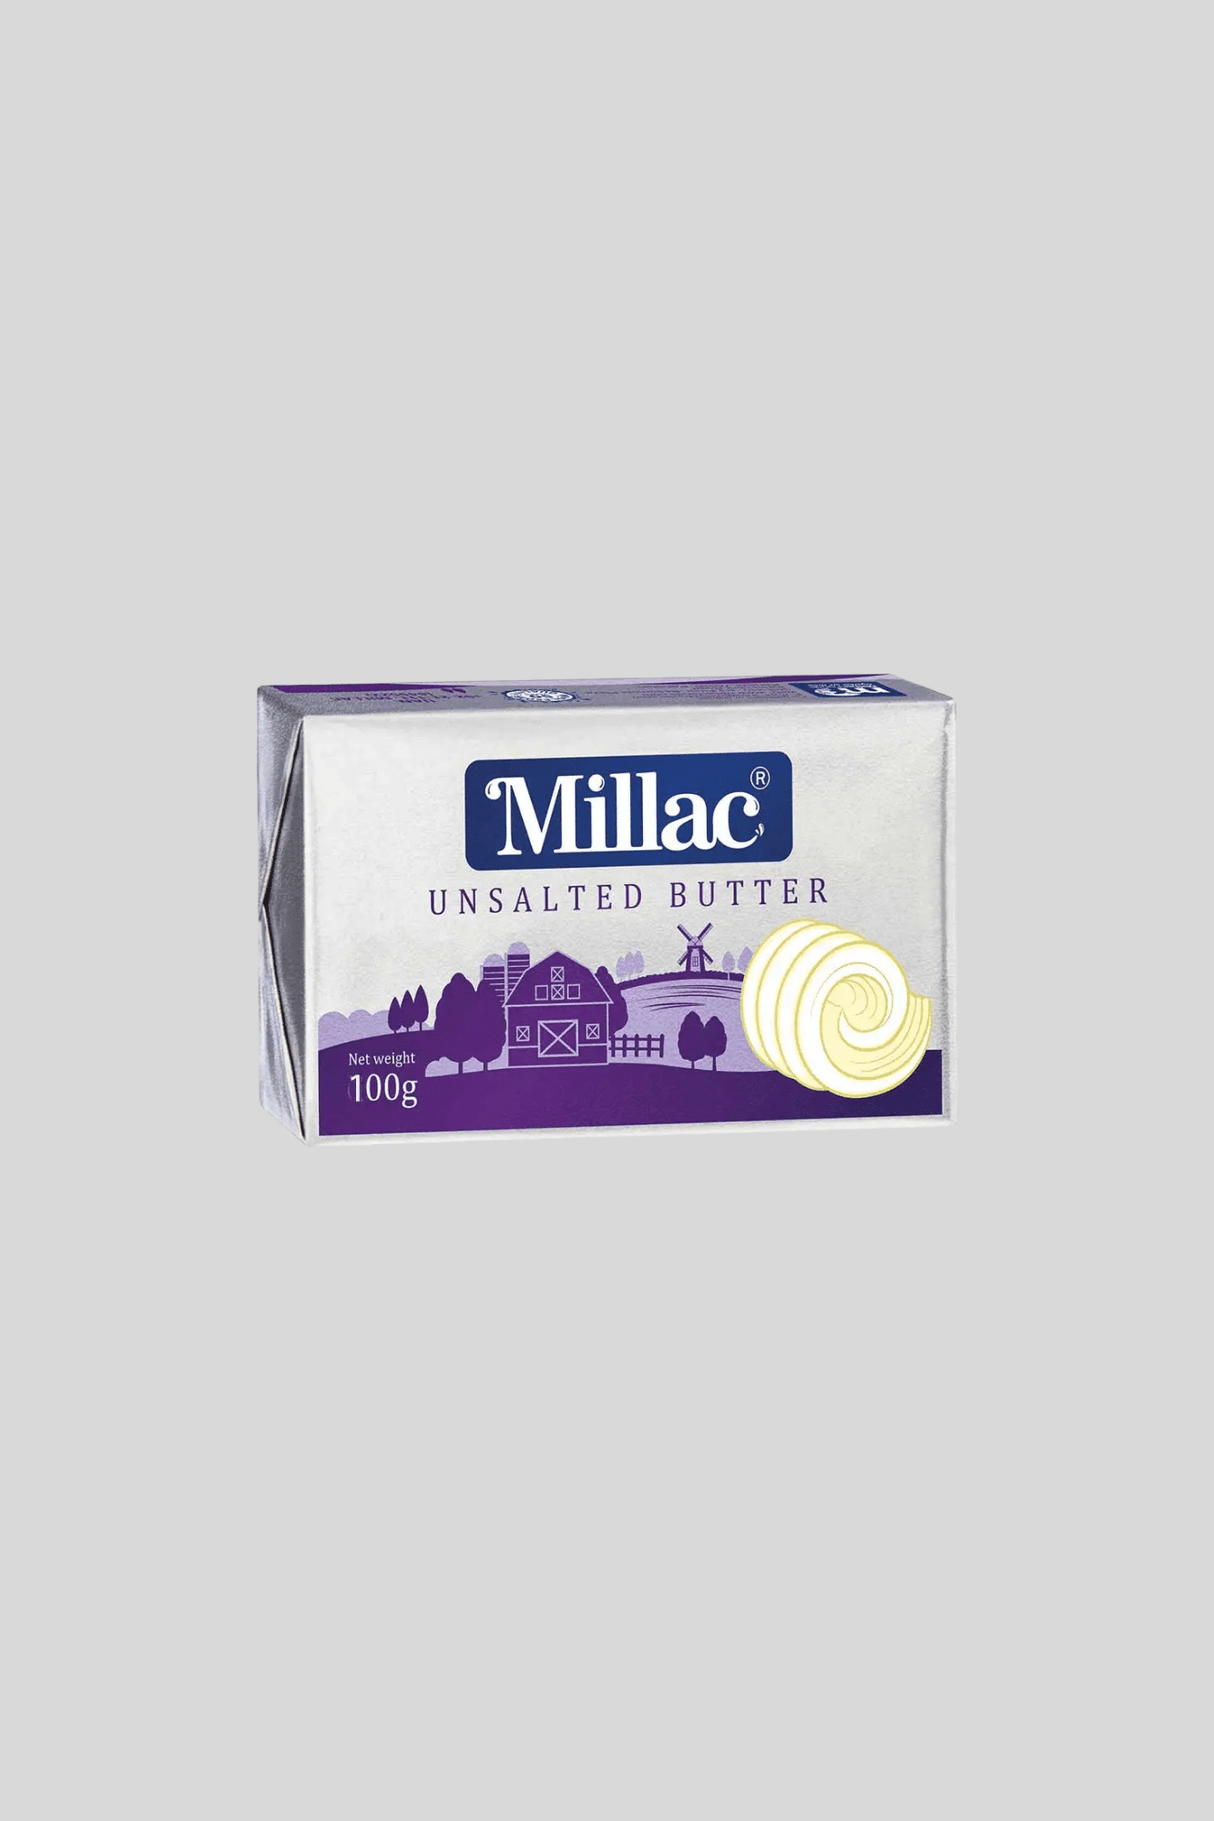 millac butter unsalted 100g